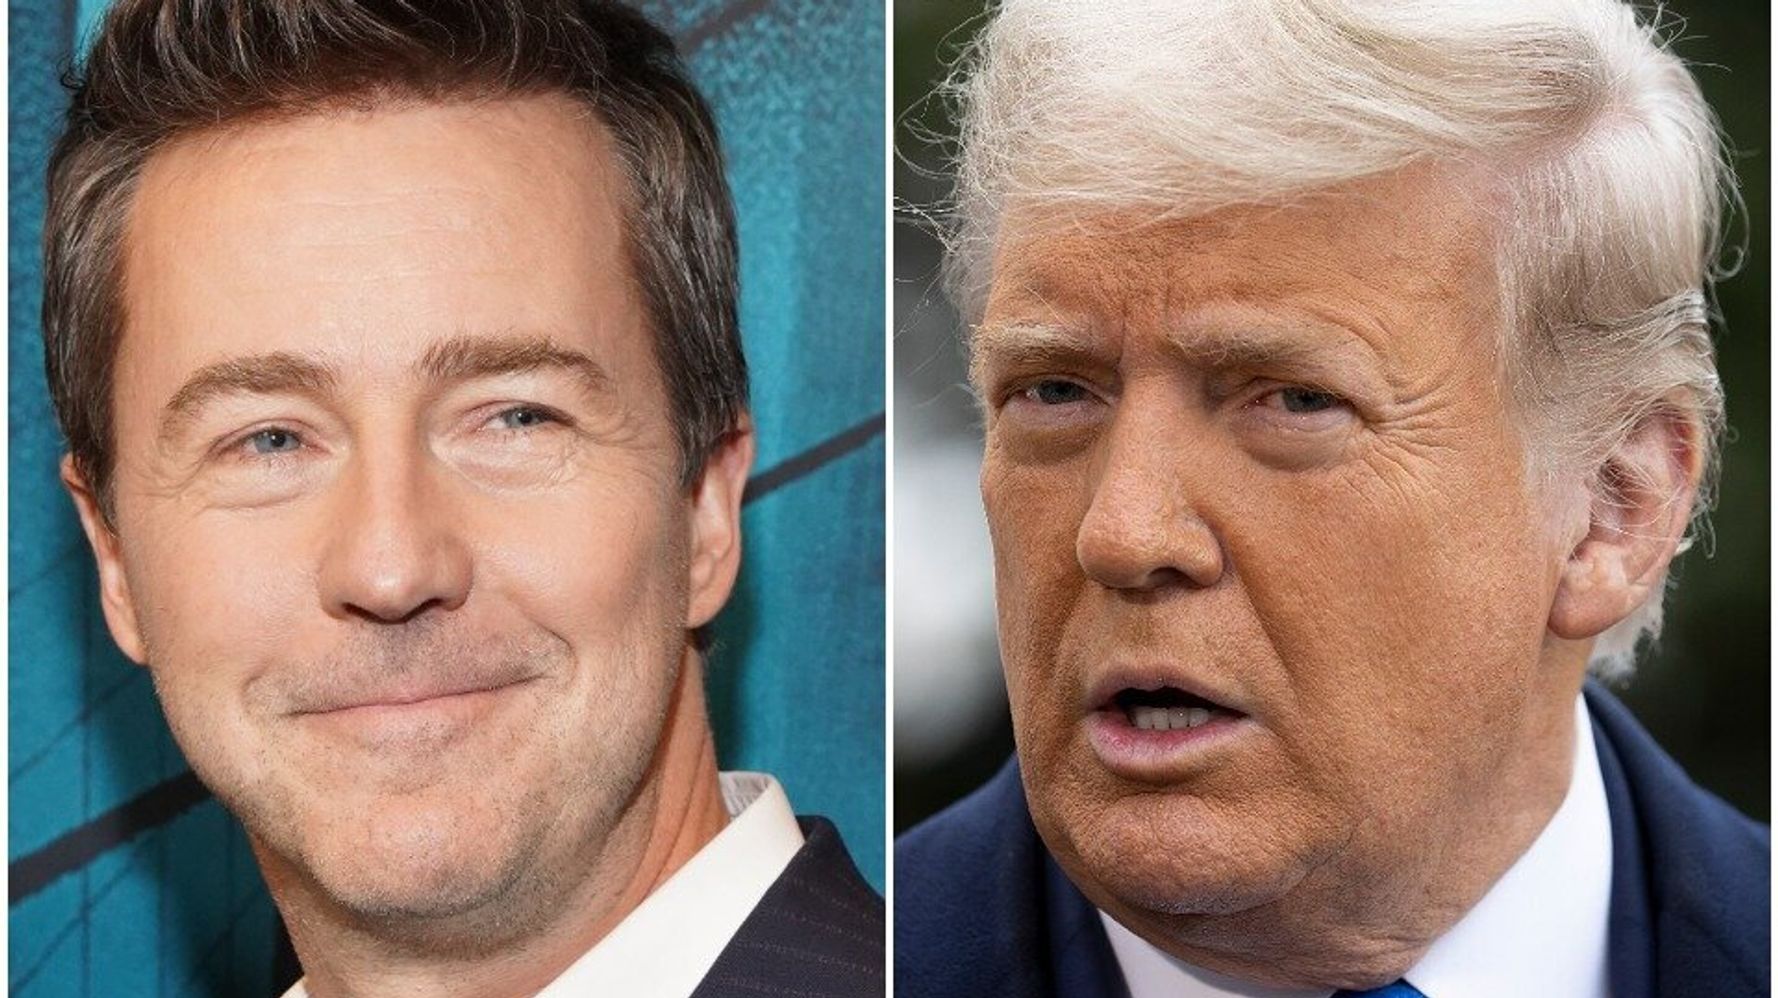 Edward Norton Compares ‘Whiny’ Trump’s Actions To A Failed Poker Hand